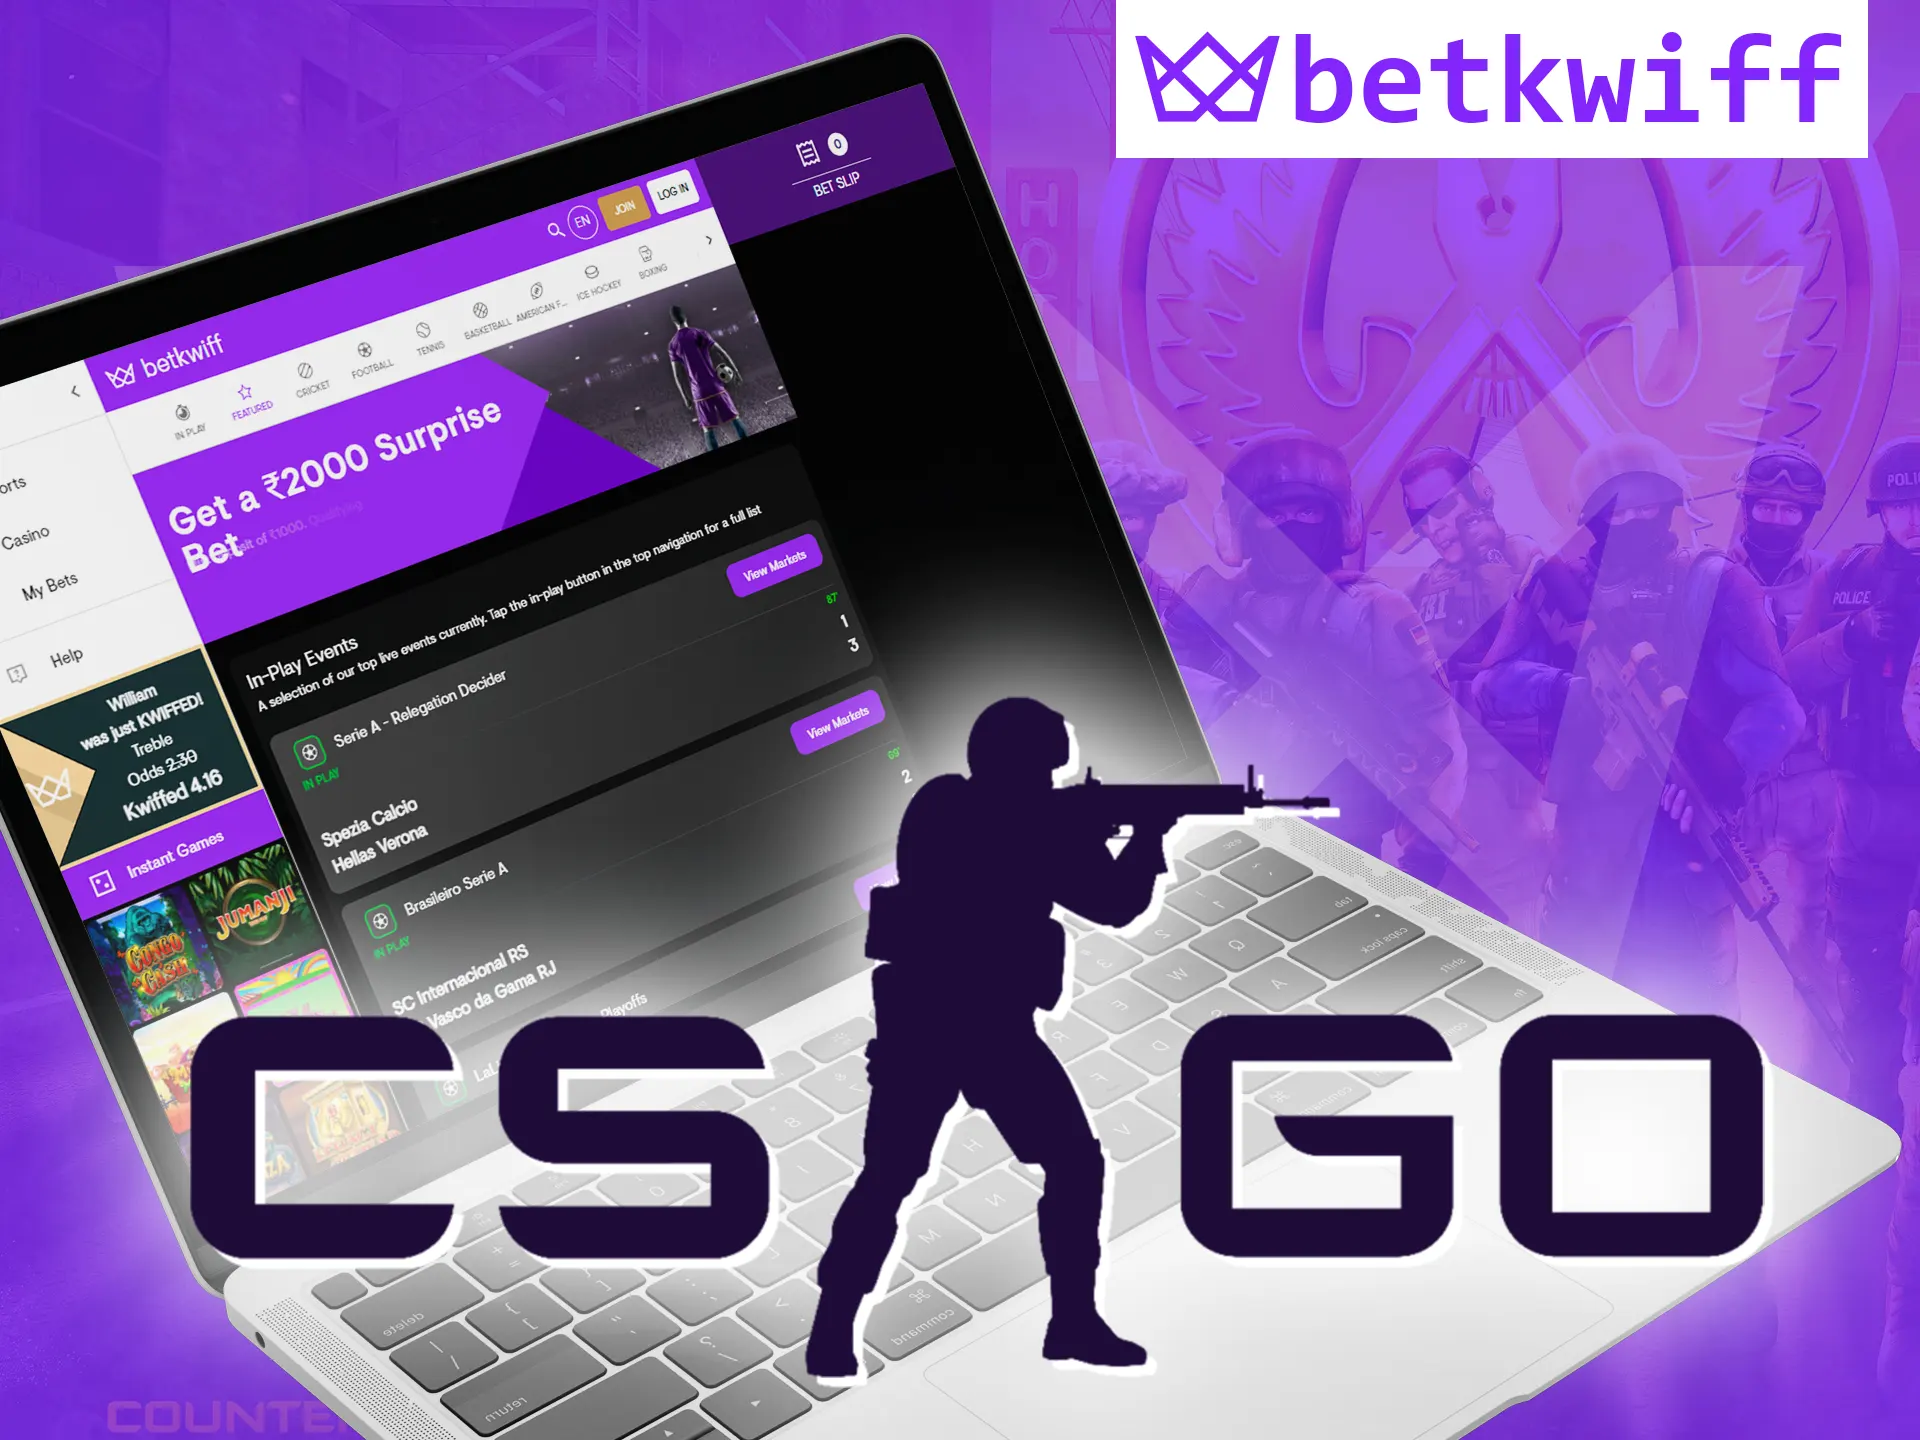 Place your bets on the CS:GO tournament with Betkwiff.